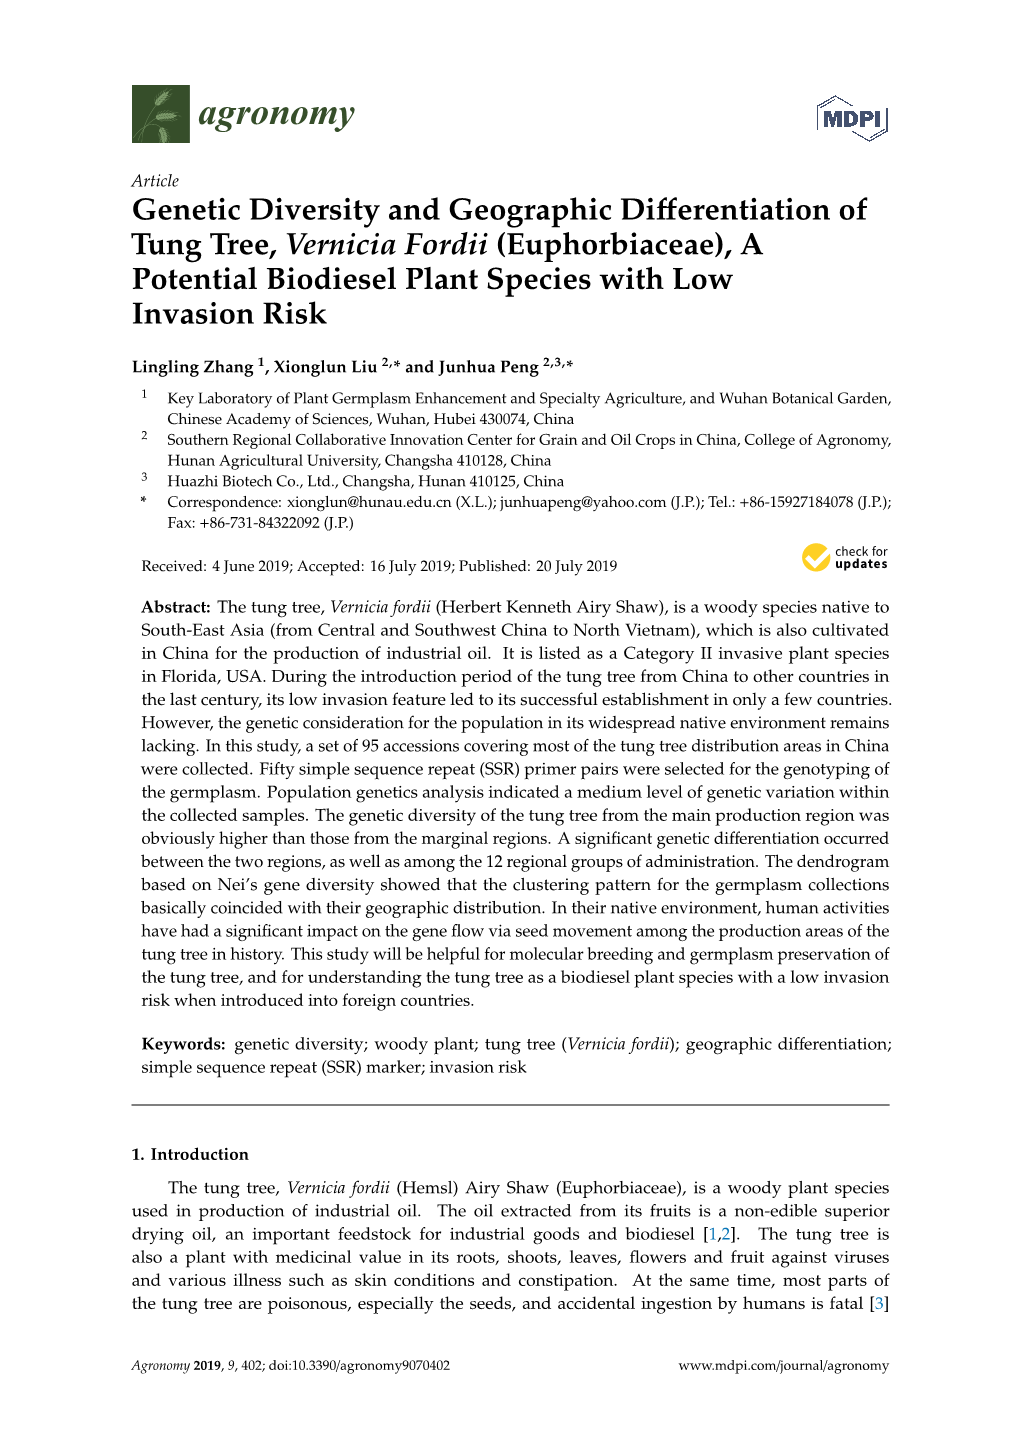 Genetic Diversity and Geographic Differentiation of Tung Tree